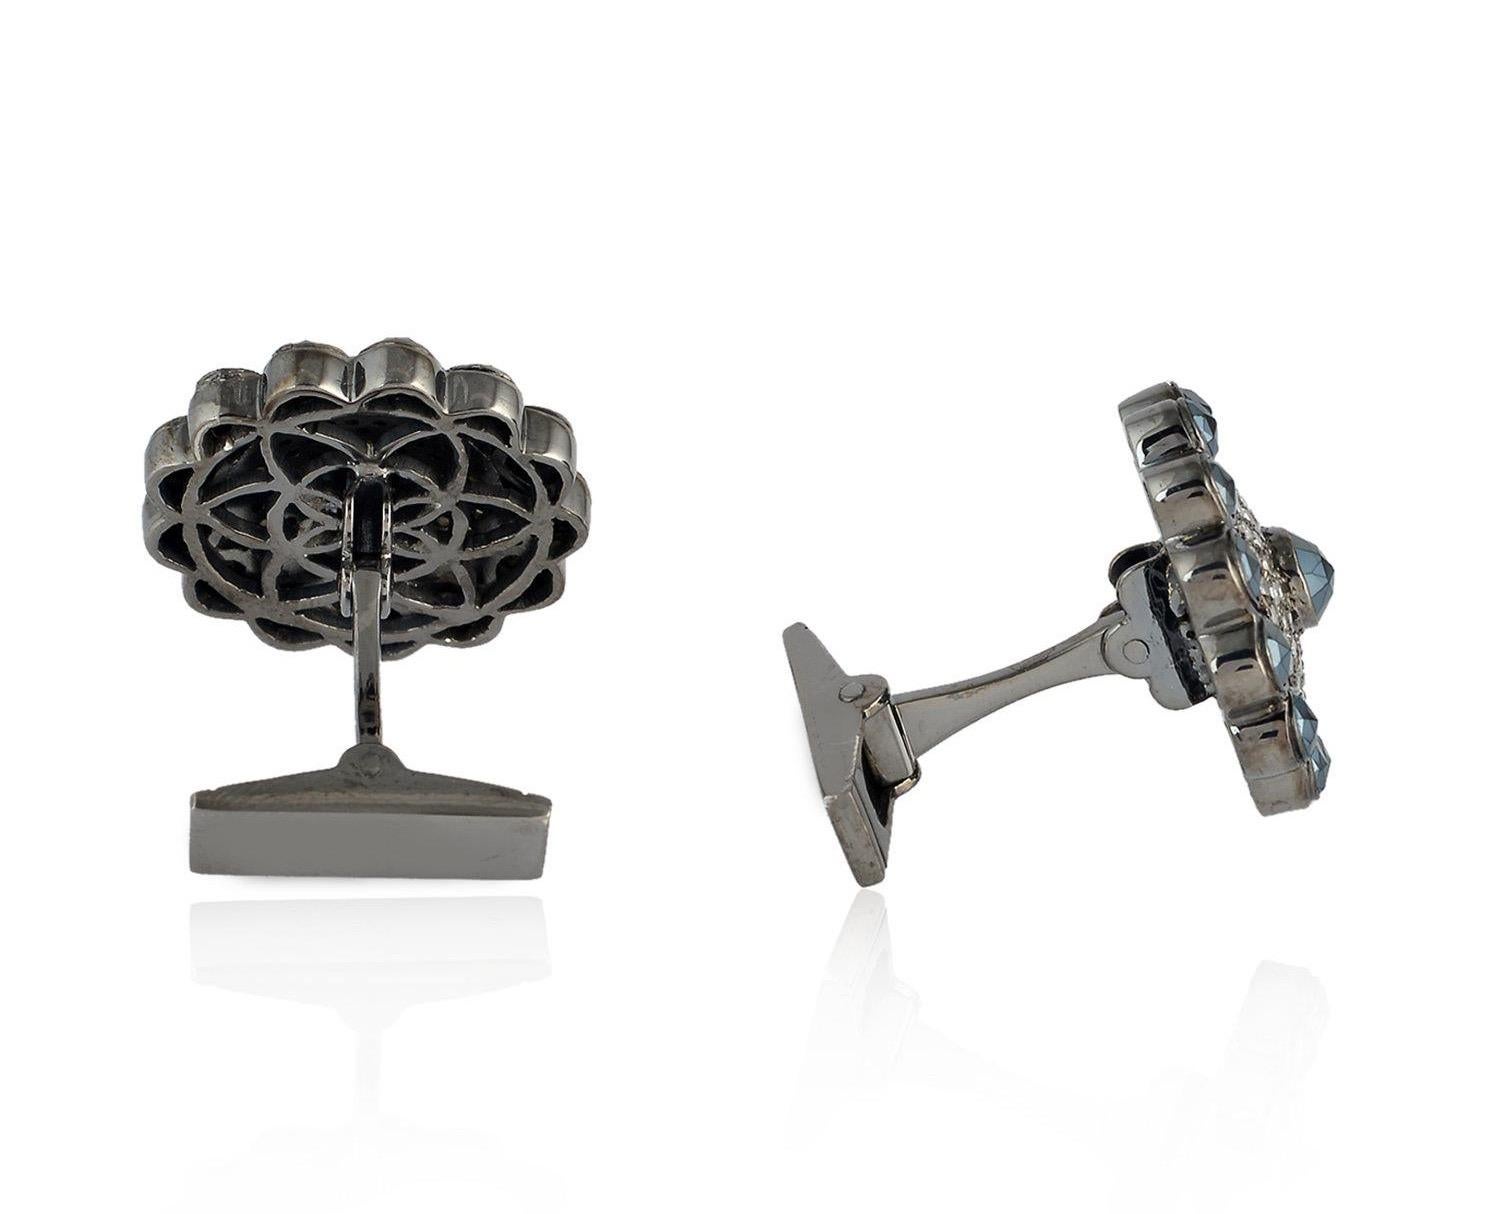 Cast from sterling silver, these cuff links are hand set with 6.29 carats Spinel and .95 carats of pave diamonds in blackened finish.

FOLLOW  MEGHNA JEWELS storefront to view the latest collection & exclusive pieces.  Meghna Jewels is proudly rated